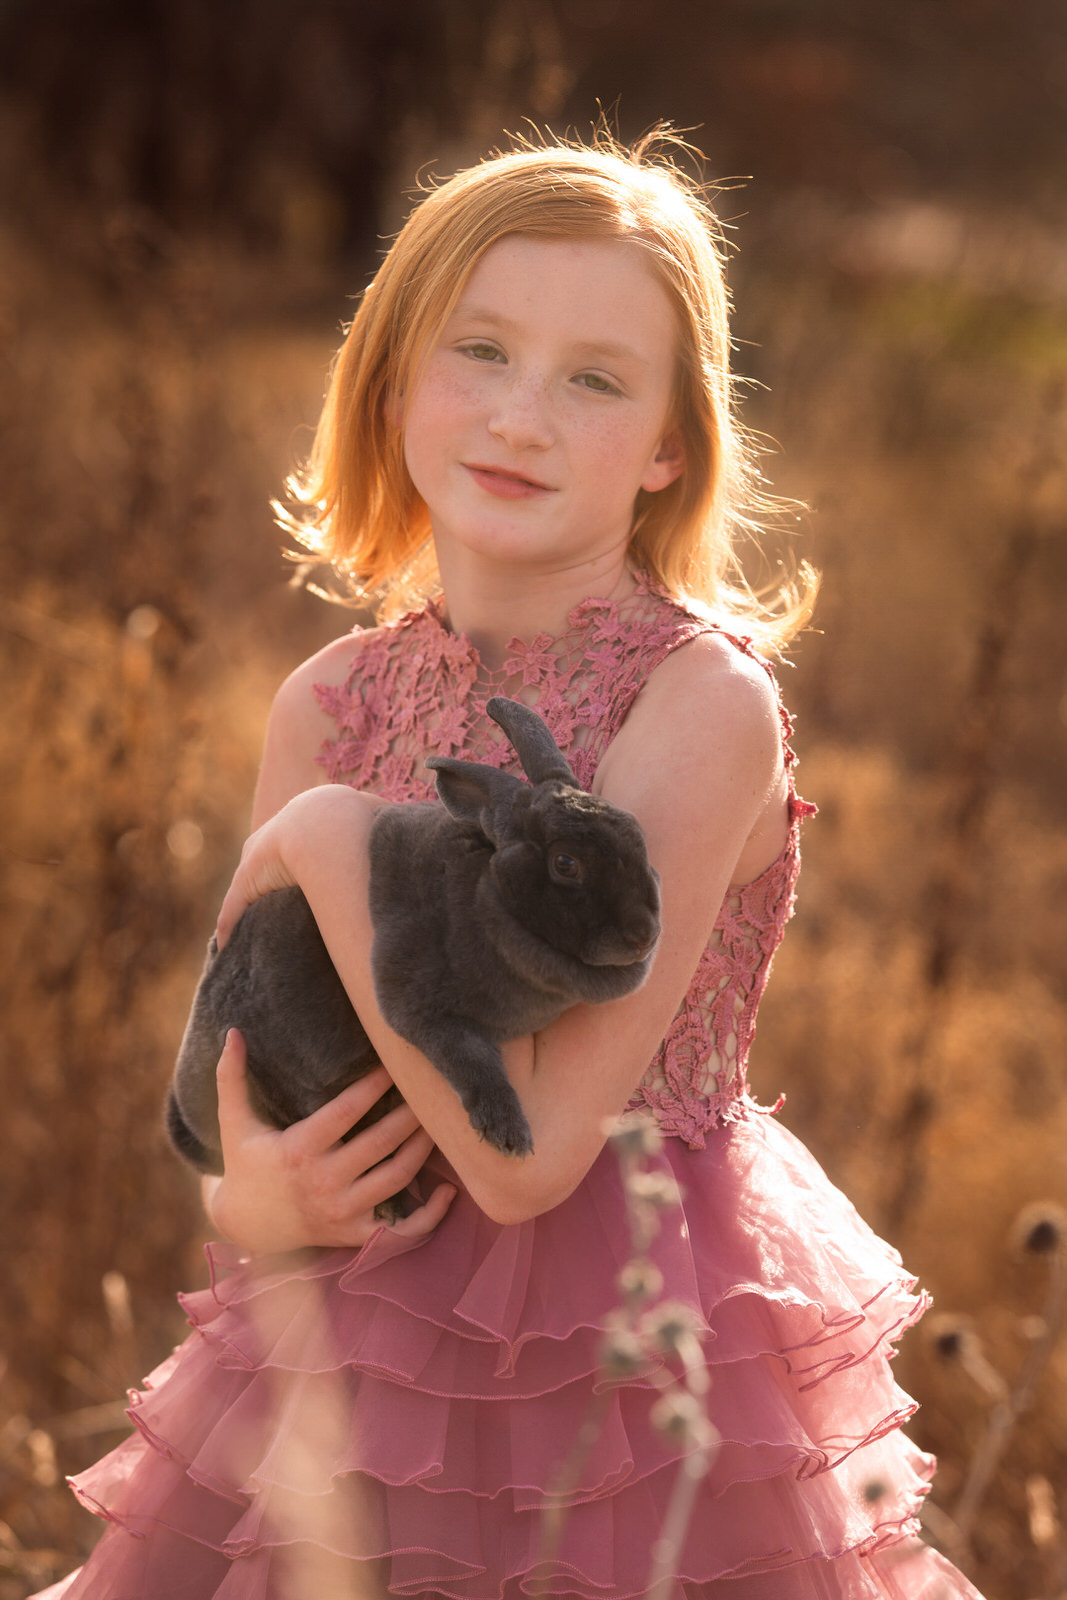 Girl holding bunny posing for spring bunny portrait session outdoors